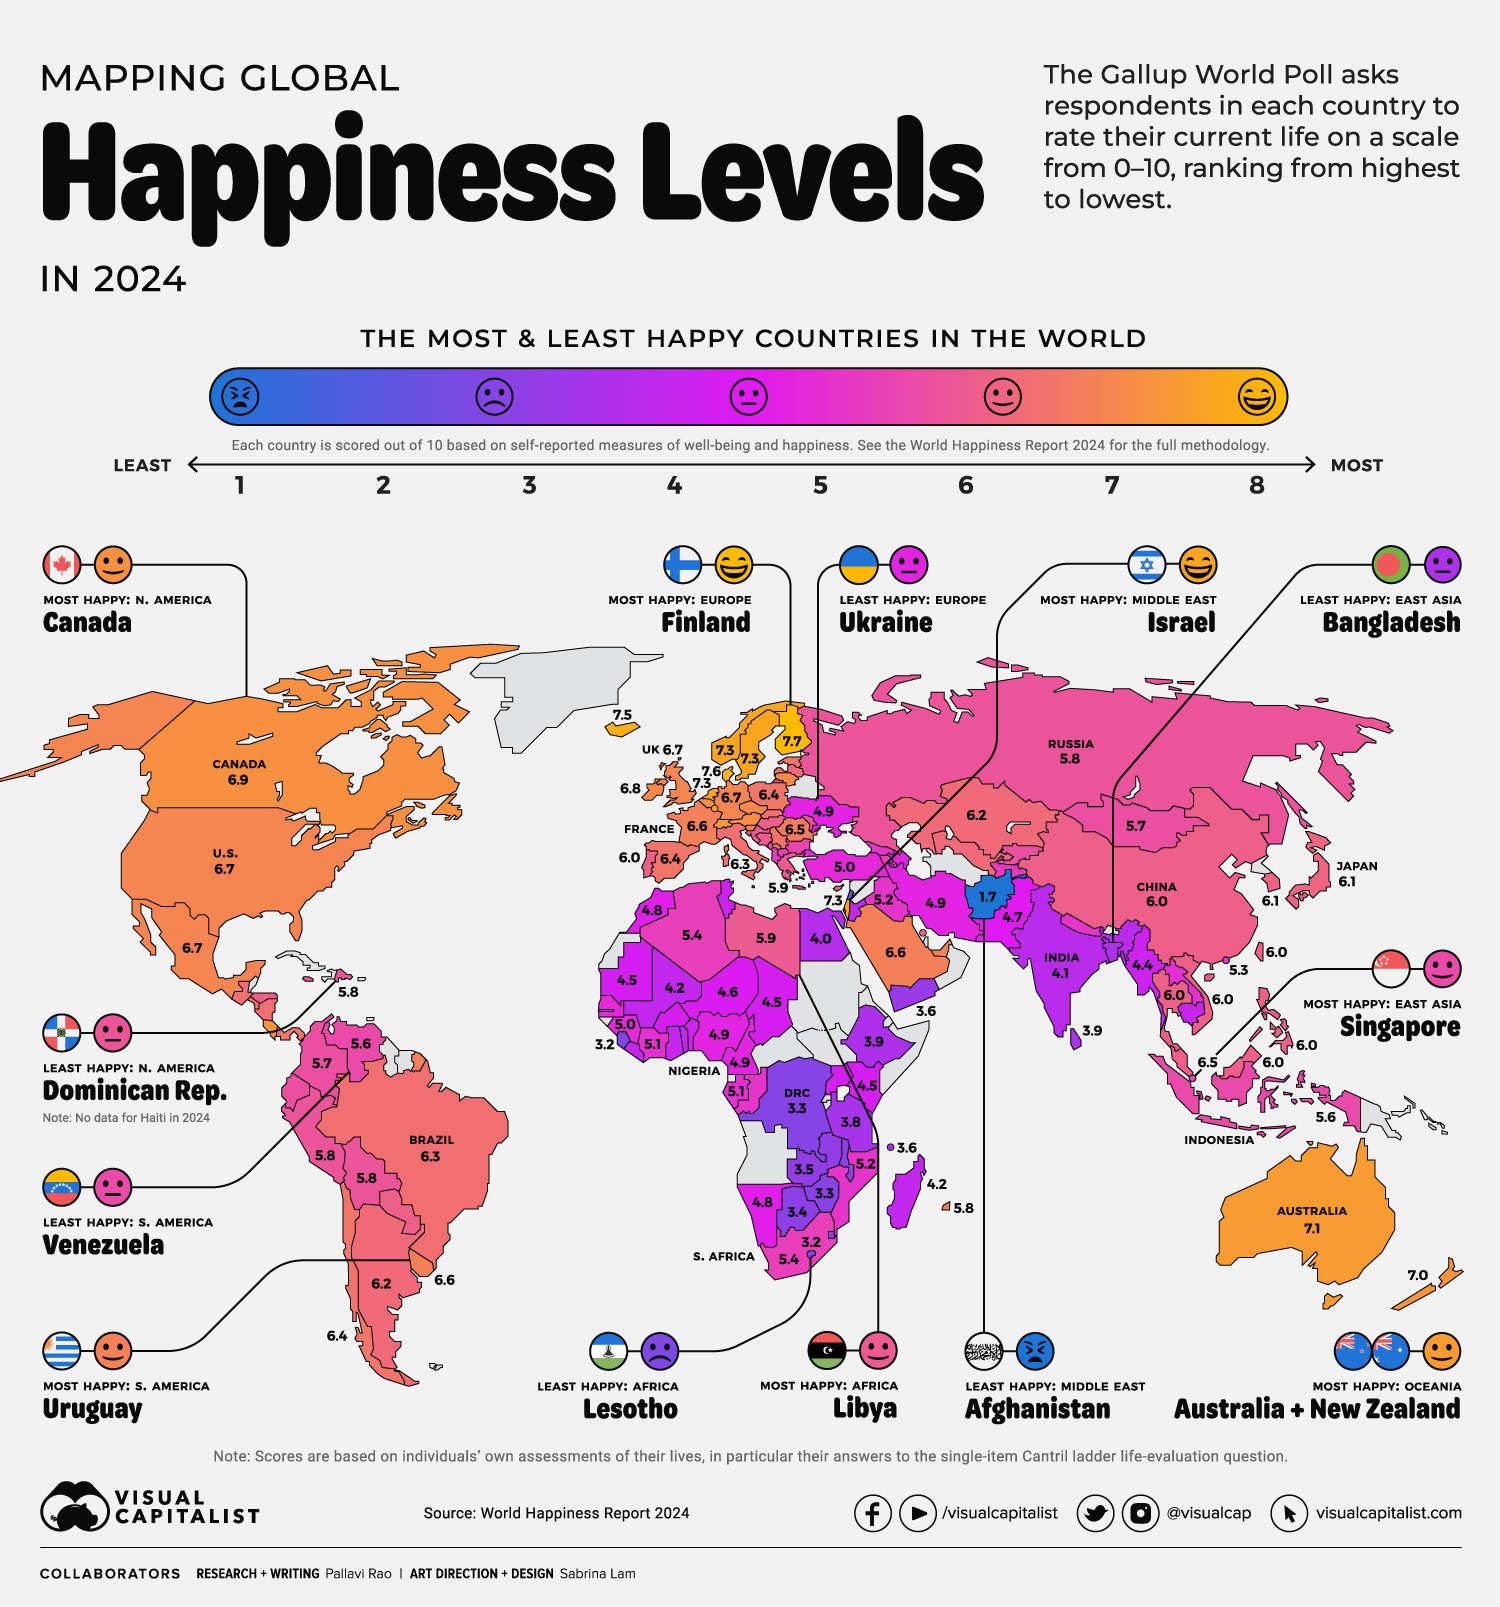 A map of the world color-coded by the average happiness level in each country.